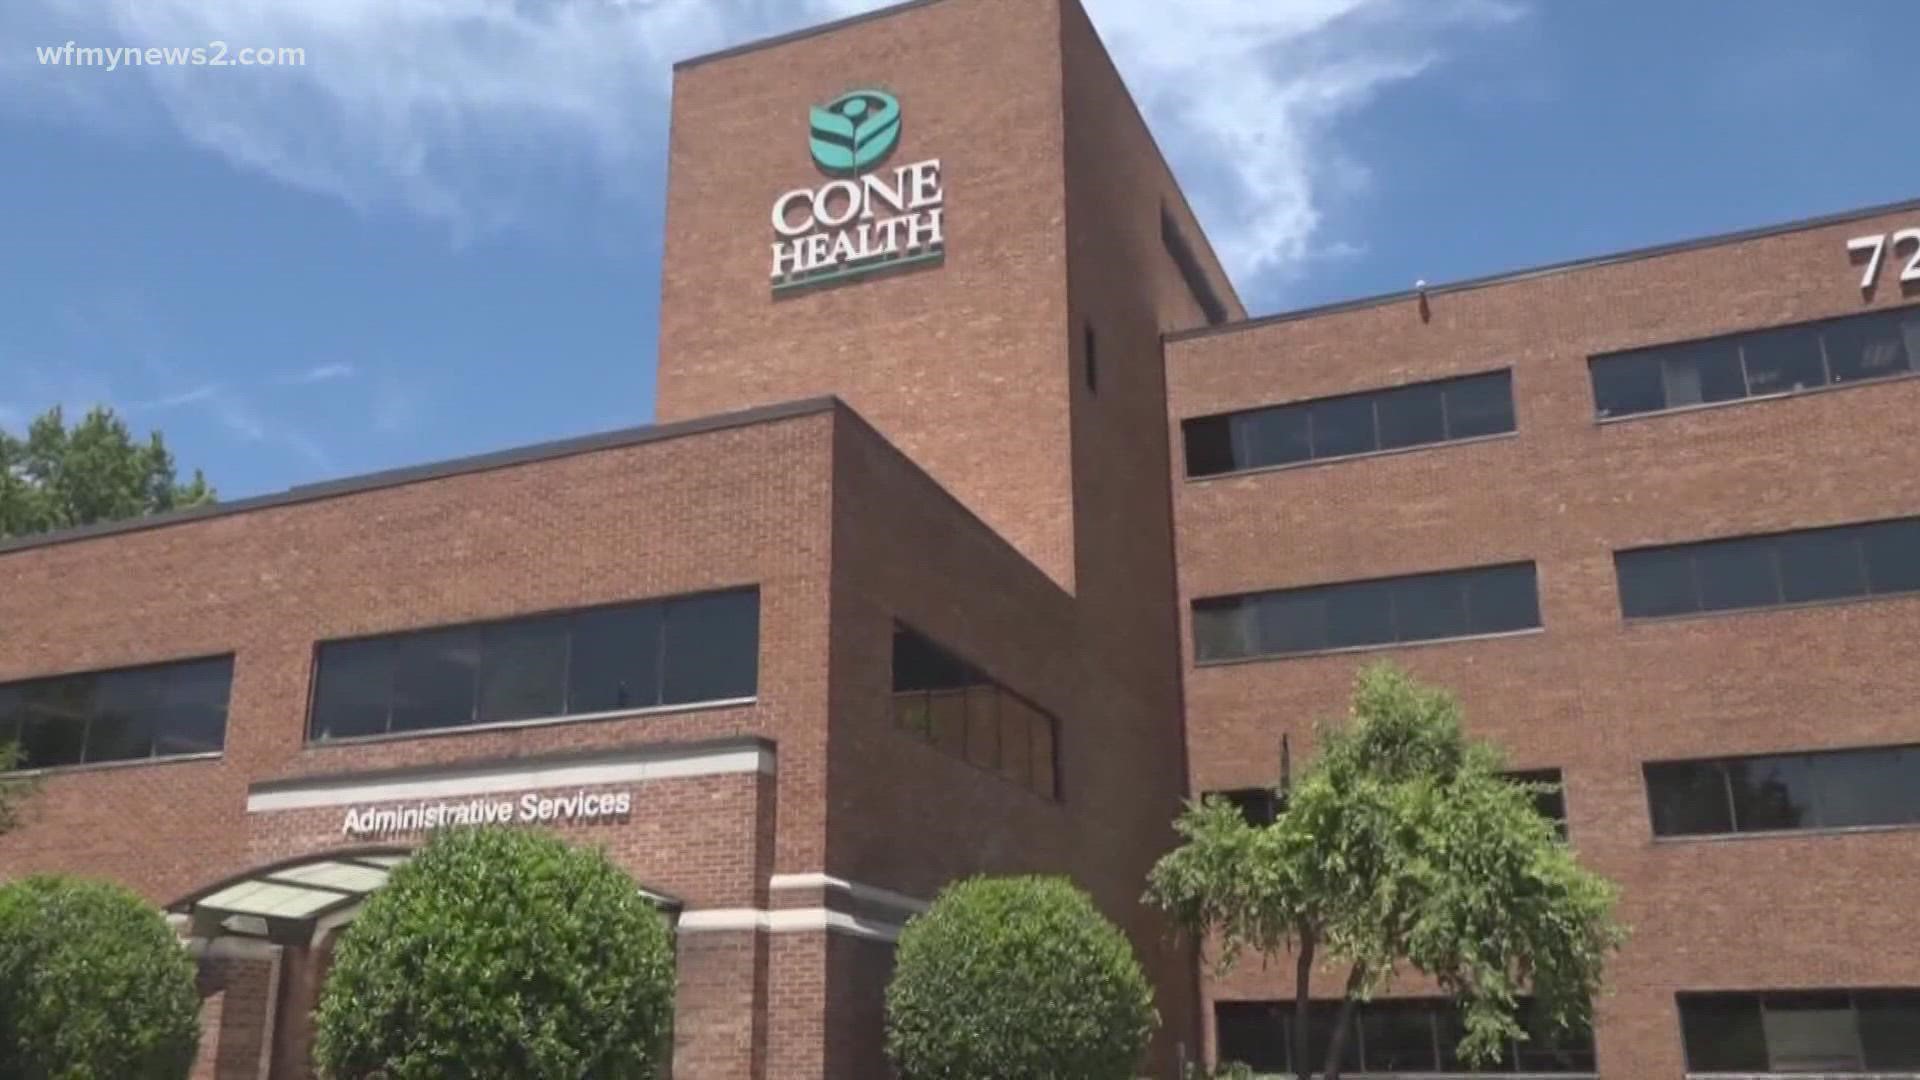 Cone Health started seeing staffing shortages during the pandemic. They hope the incentive brings people to work.